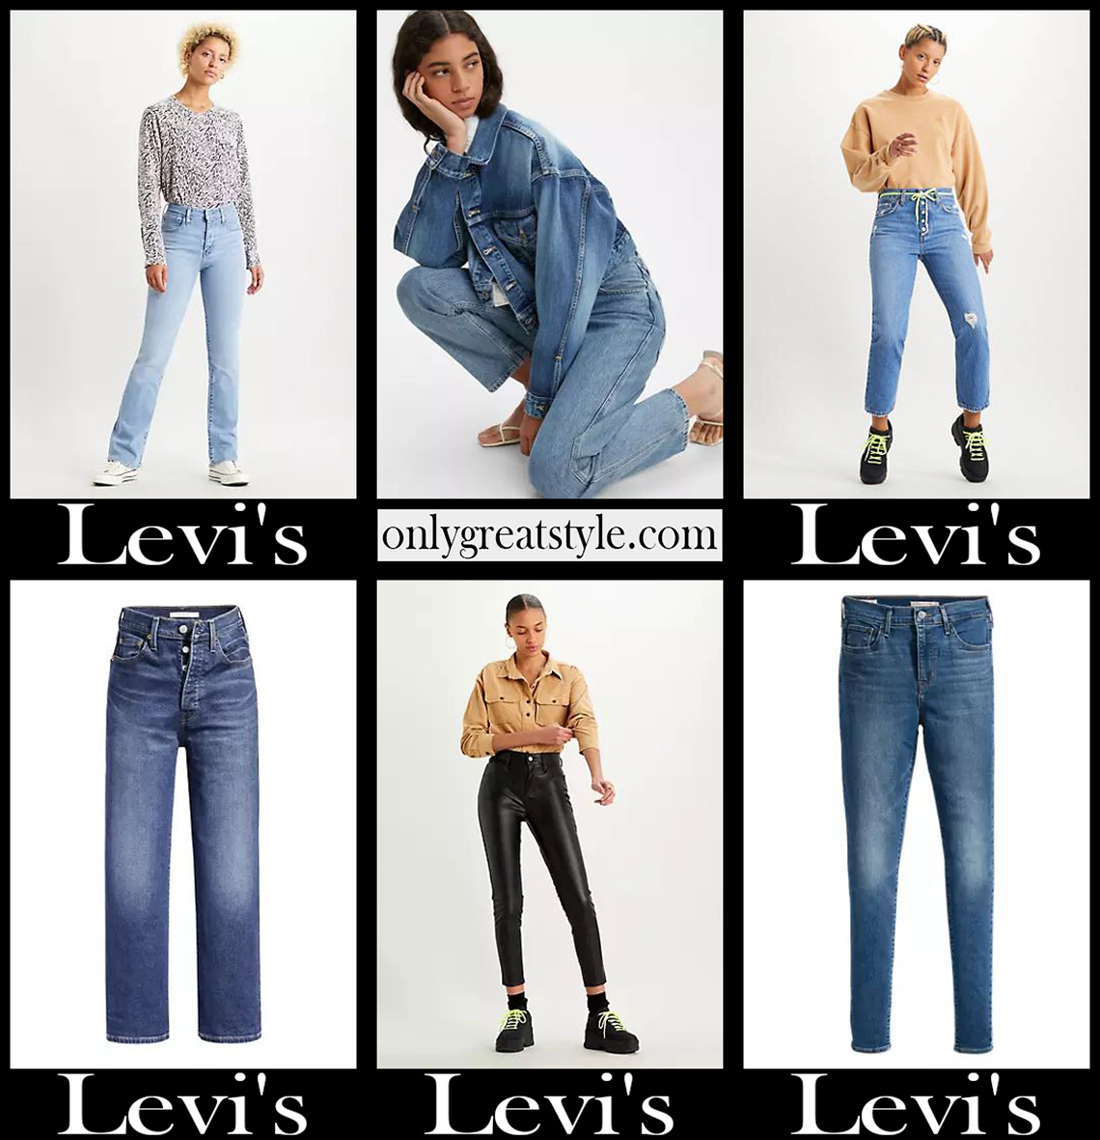 levi's new women's collection